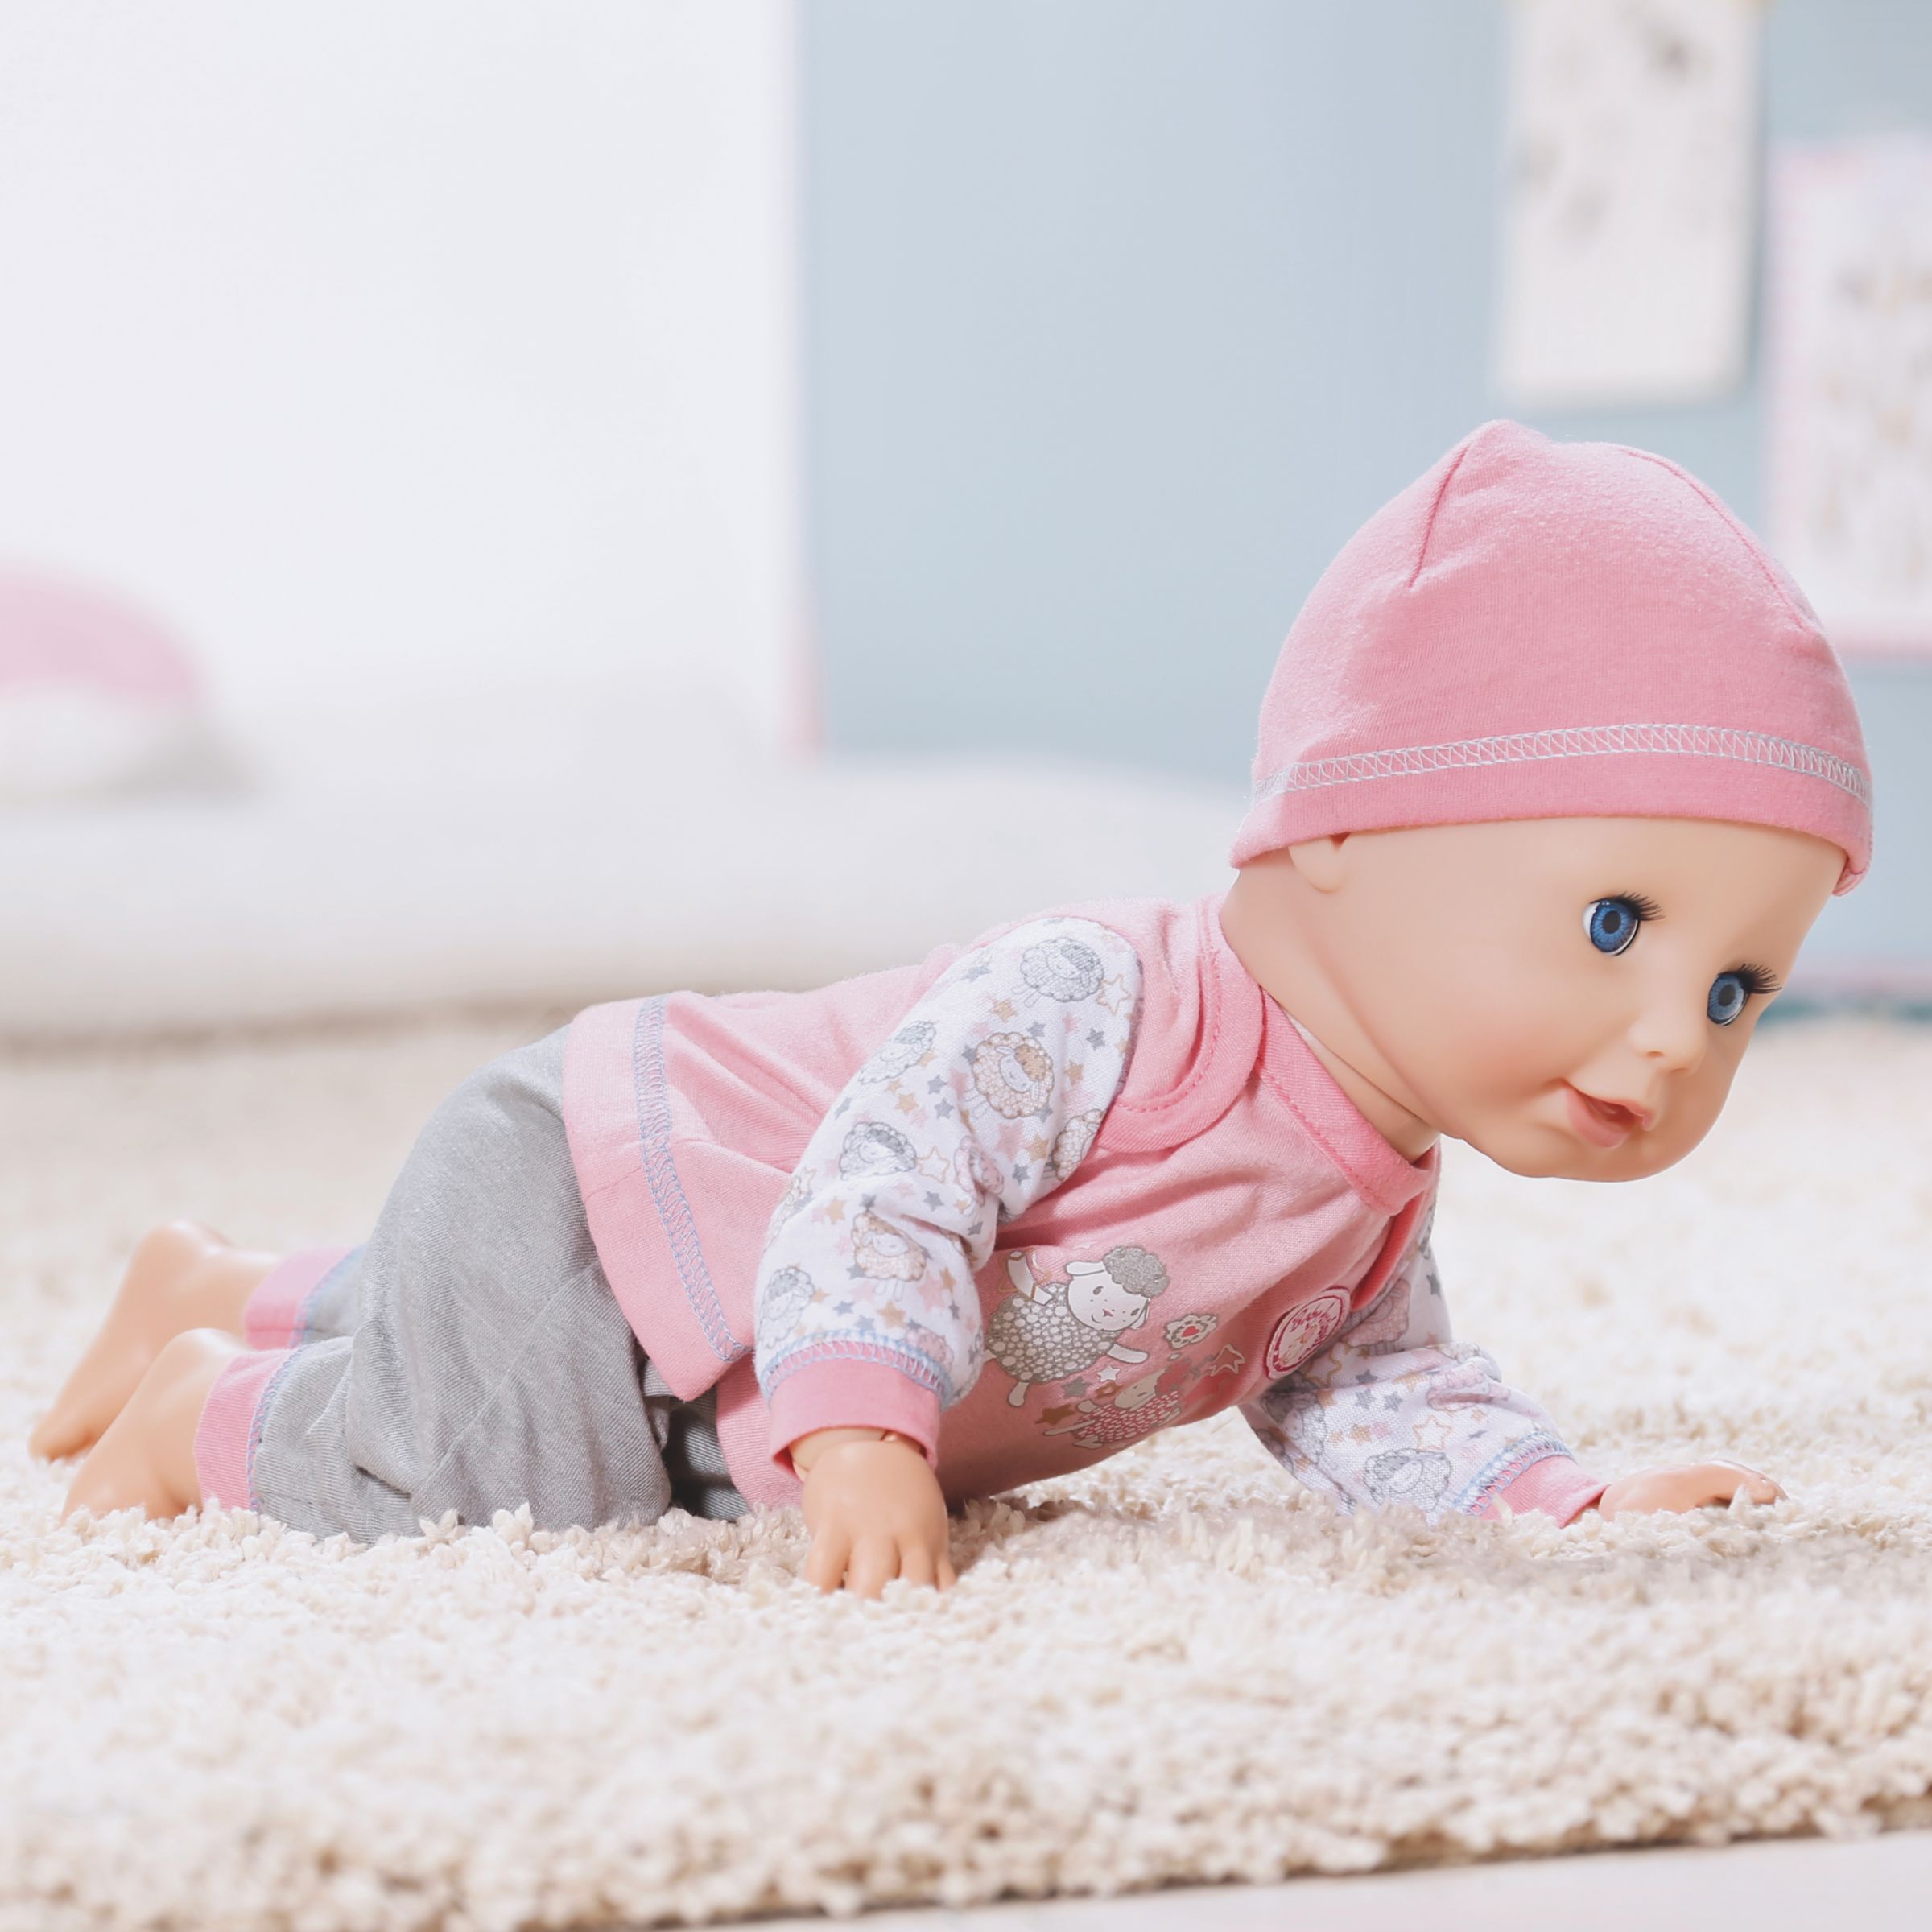 baby annabell learn to walk doll